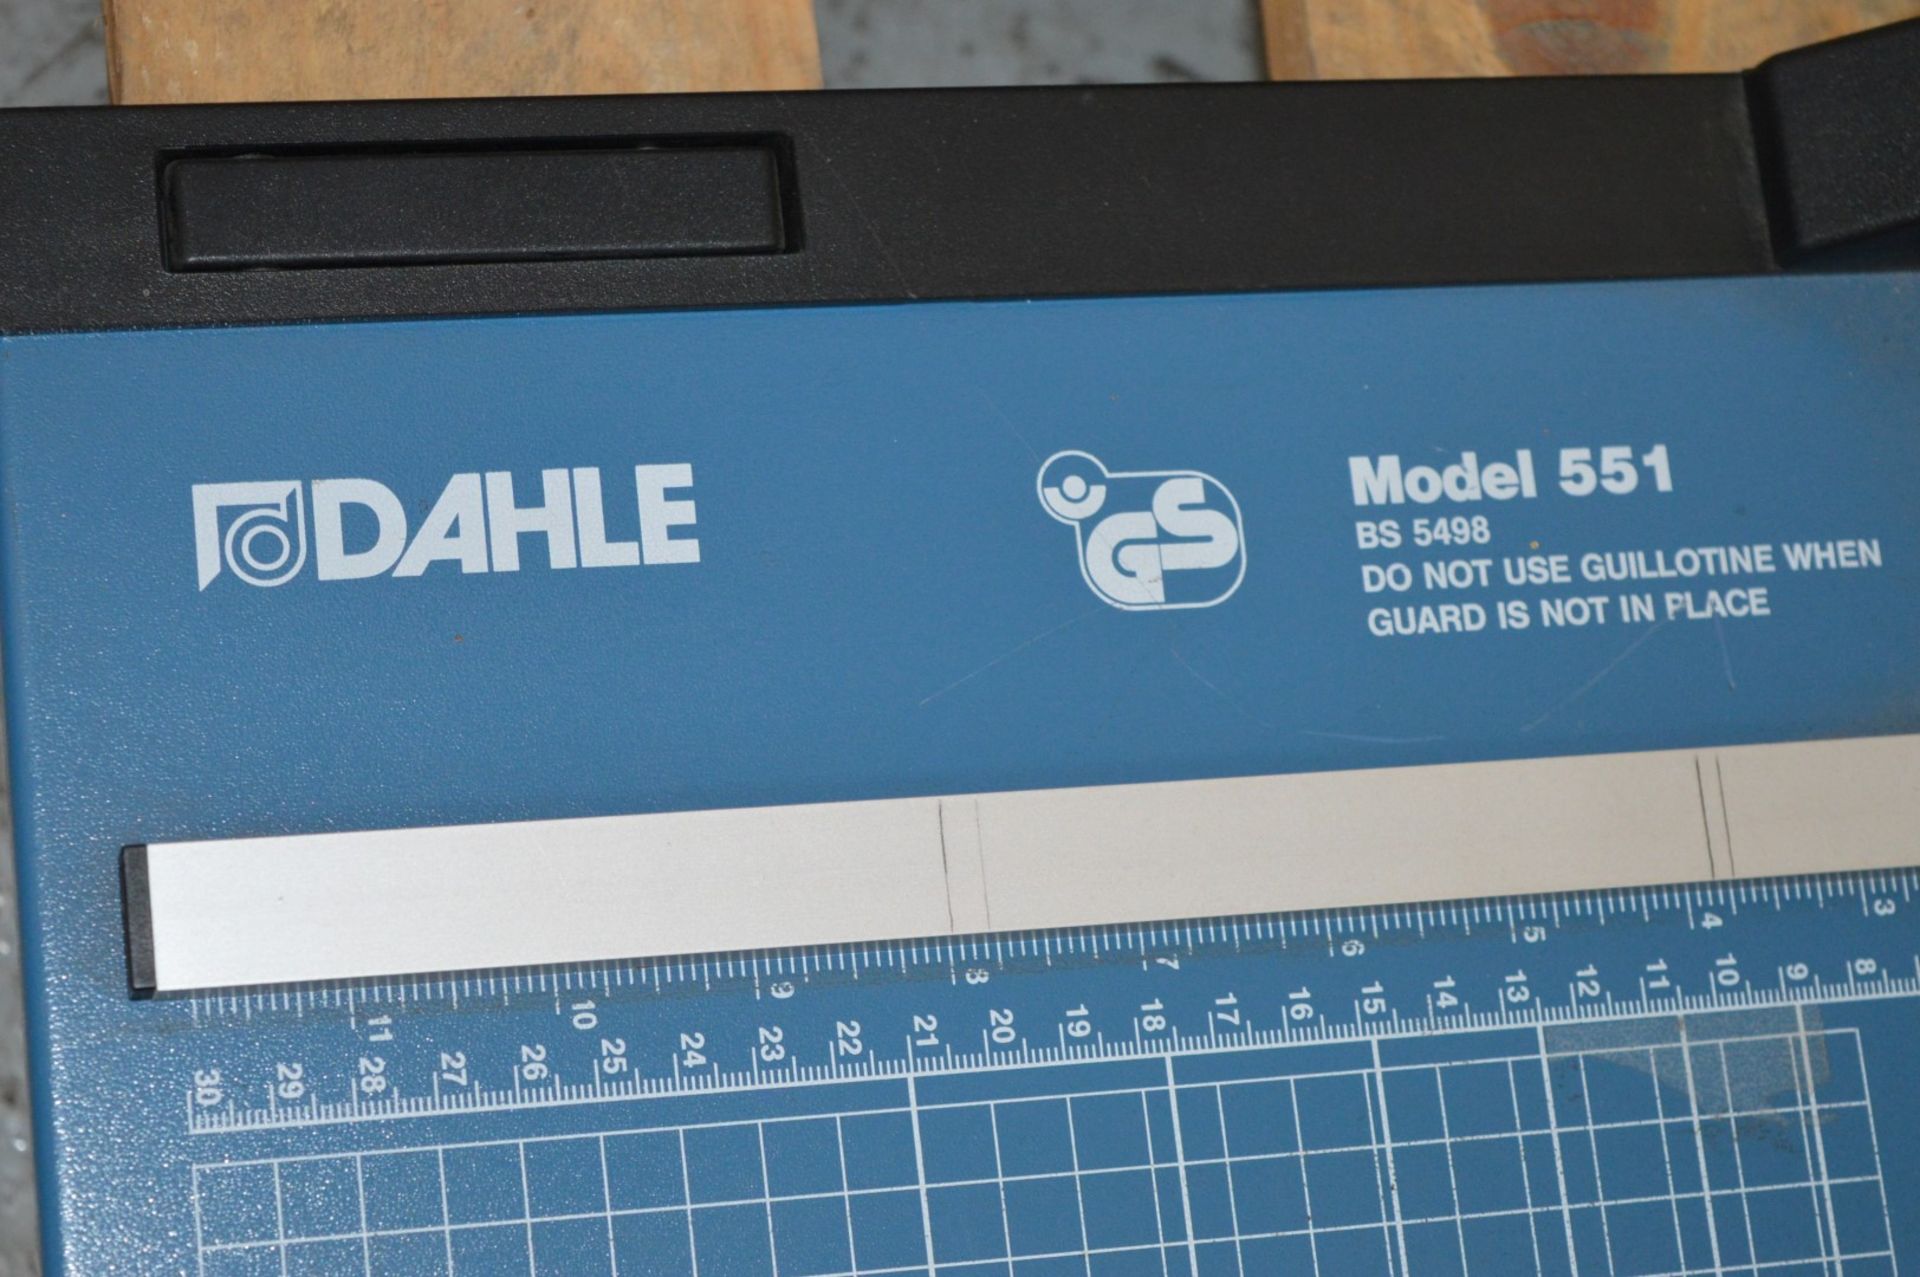 1 x Dahle Personal Paper Trimmer Cutter - Model 551 - Ideal For Arts and Crafts or Office Use - CL01 - Image 2 of 2